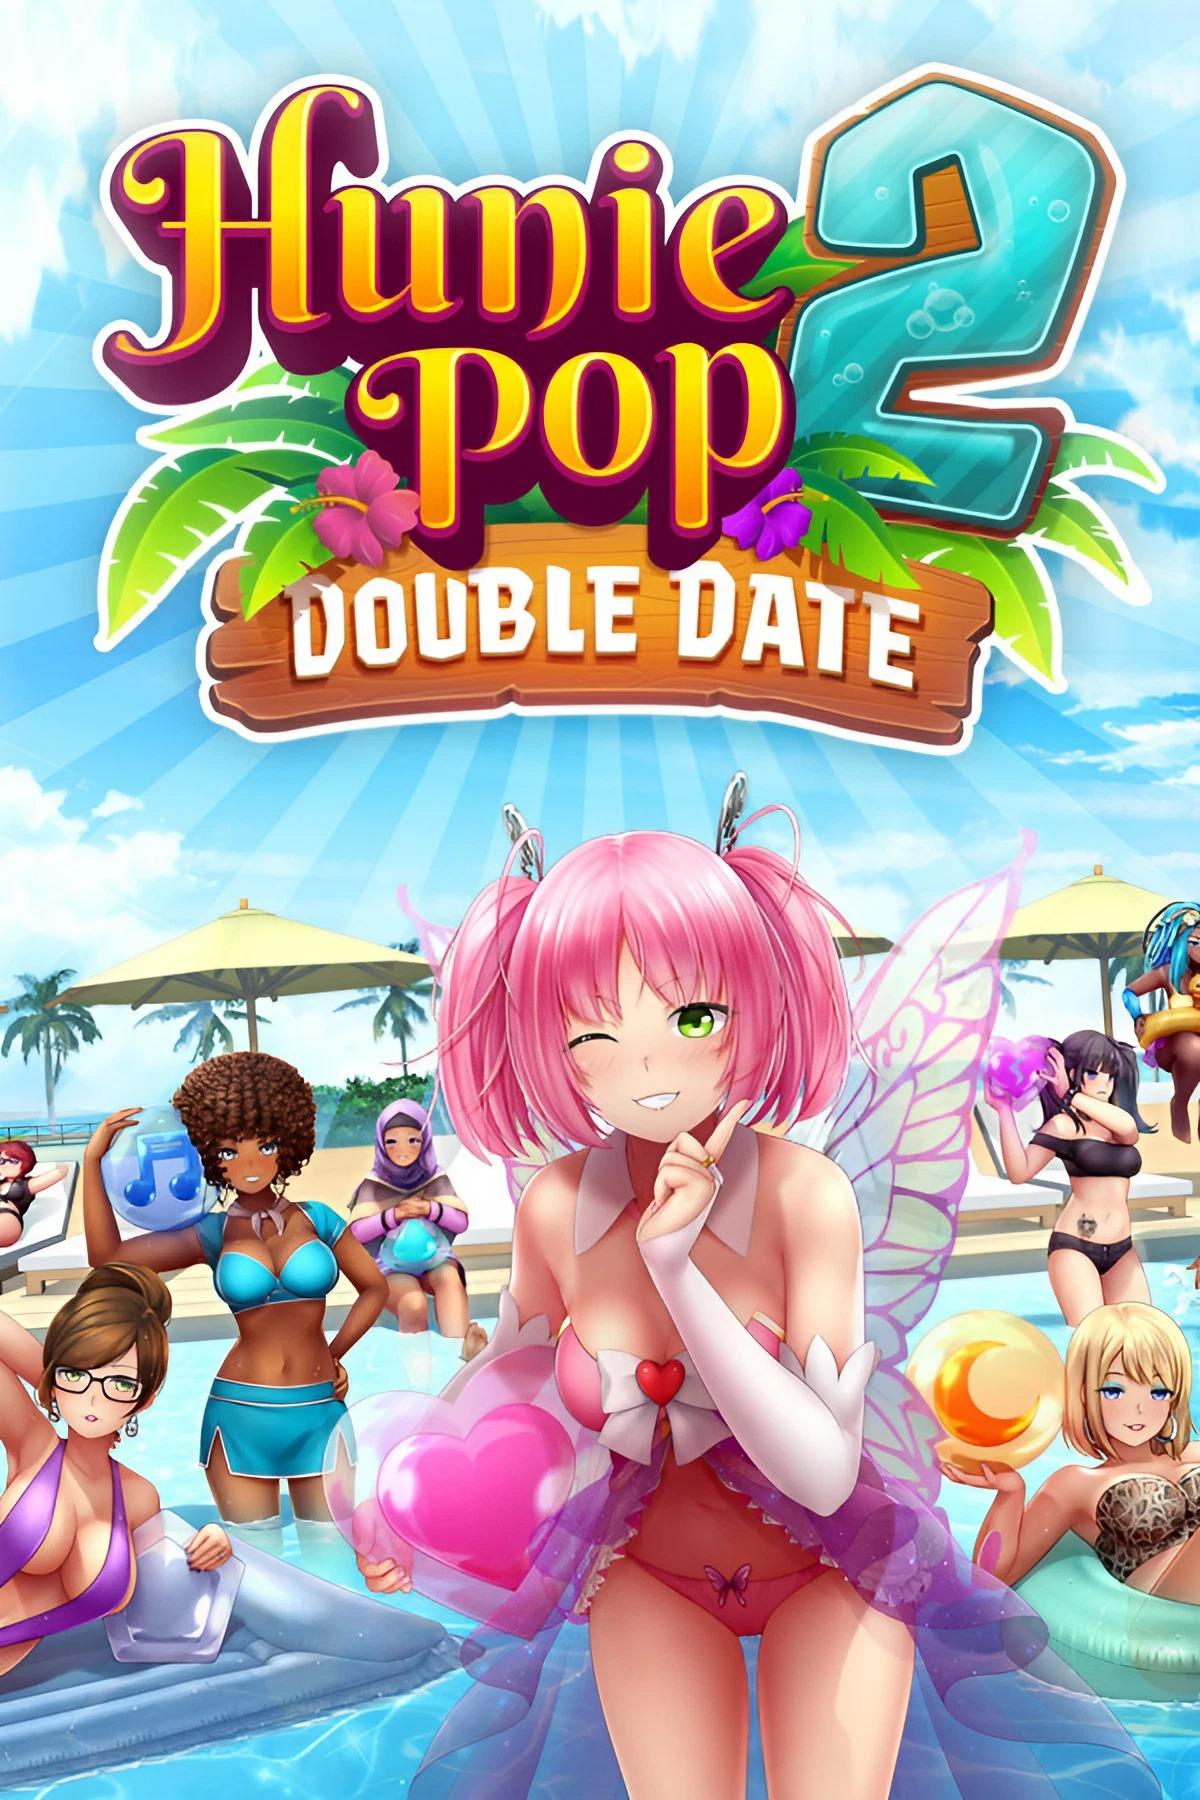 benedicta yankey recommends Is There Nudity In Huniepop